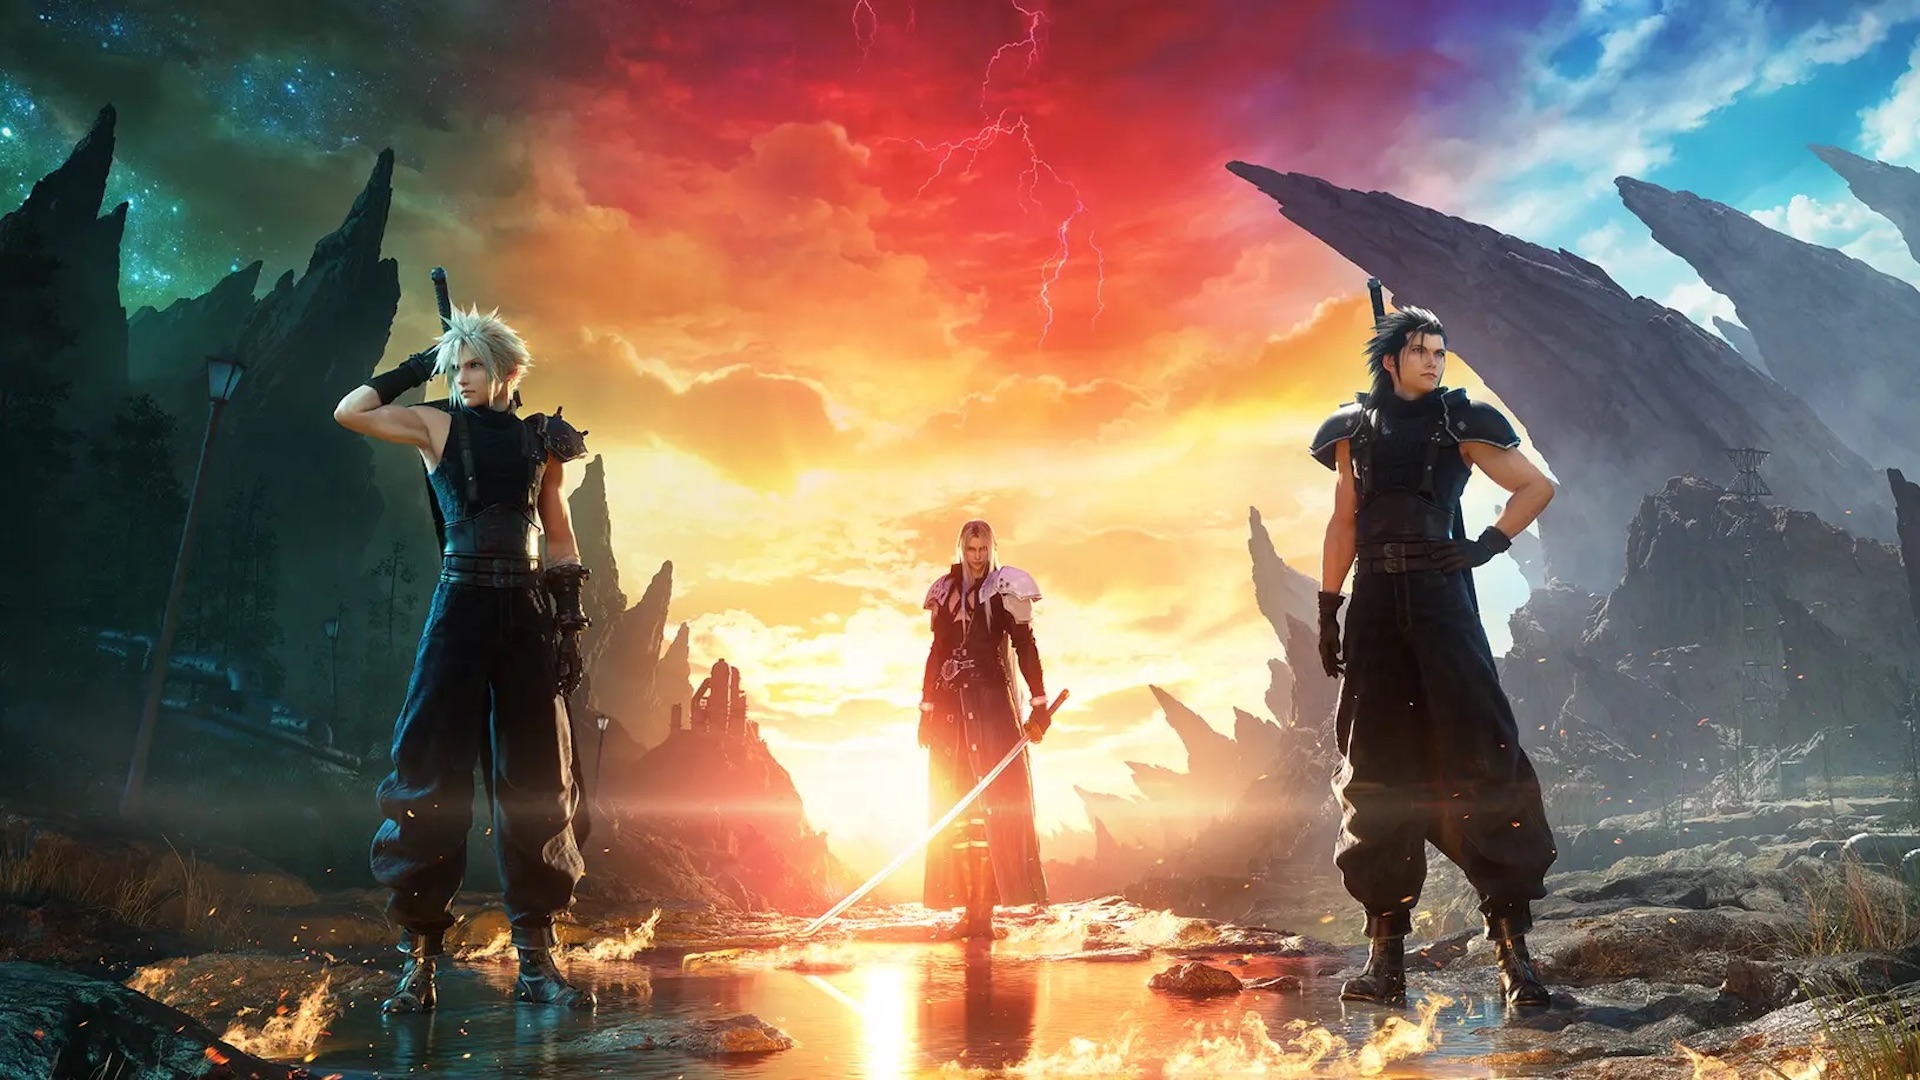 Cloud, Zack and Sephiroth stand with their backs to a vibrant sunset